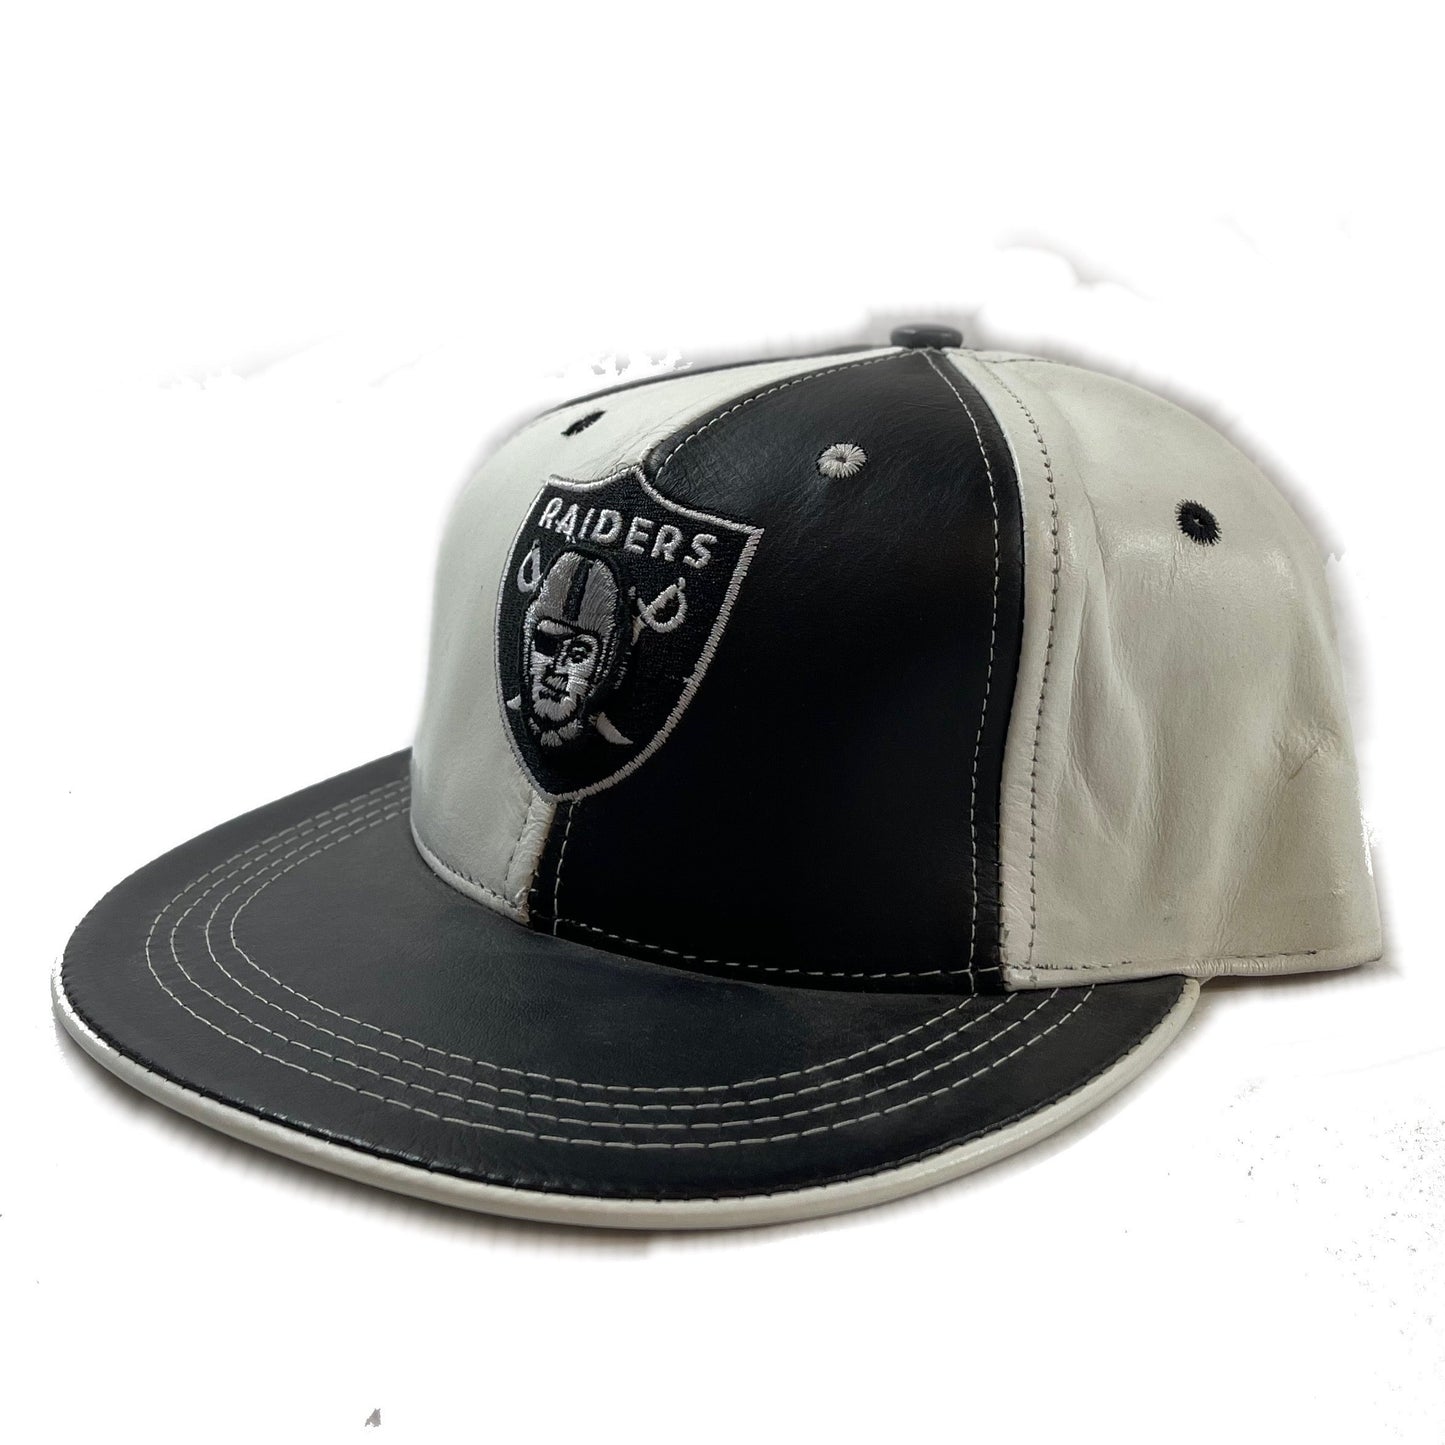 Raiders Leather (Black/White) Fitted